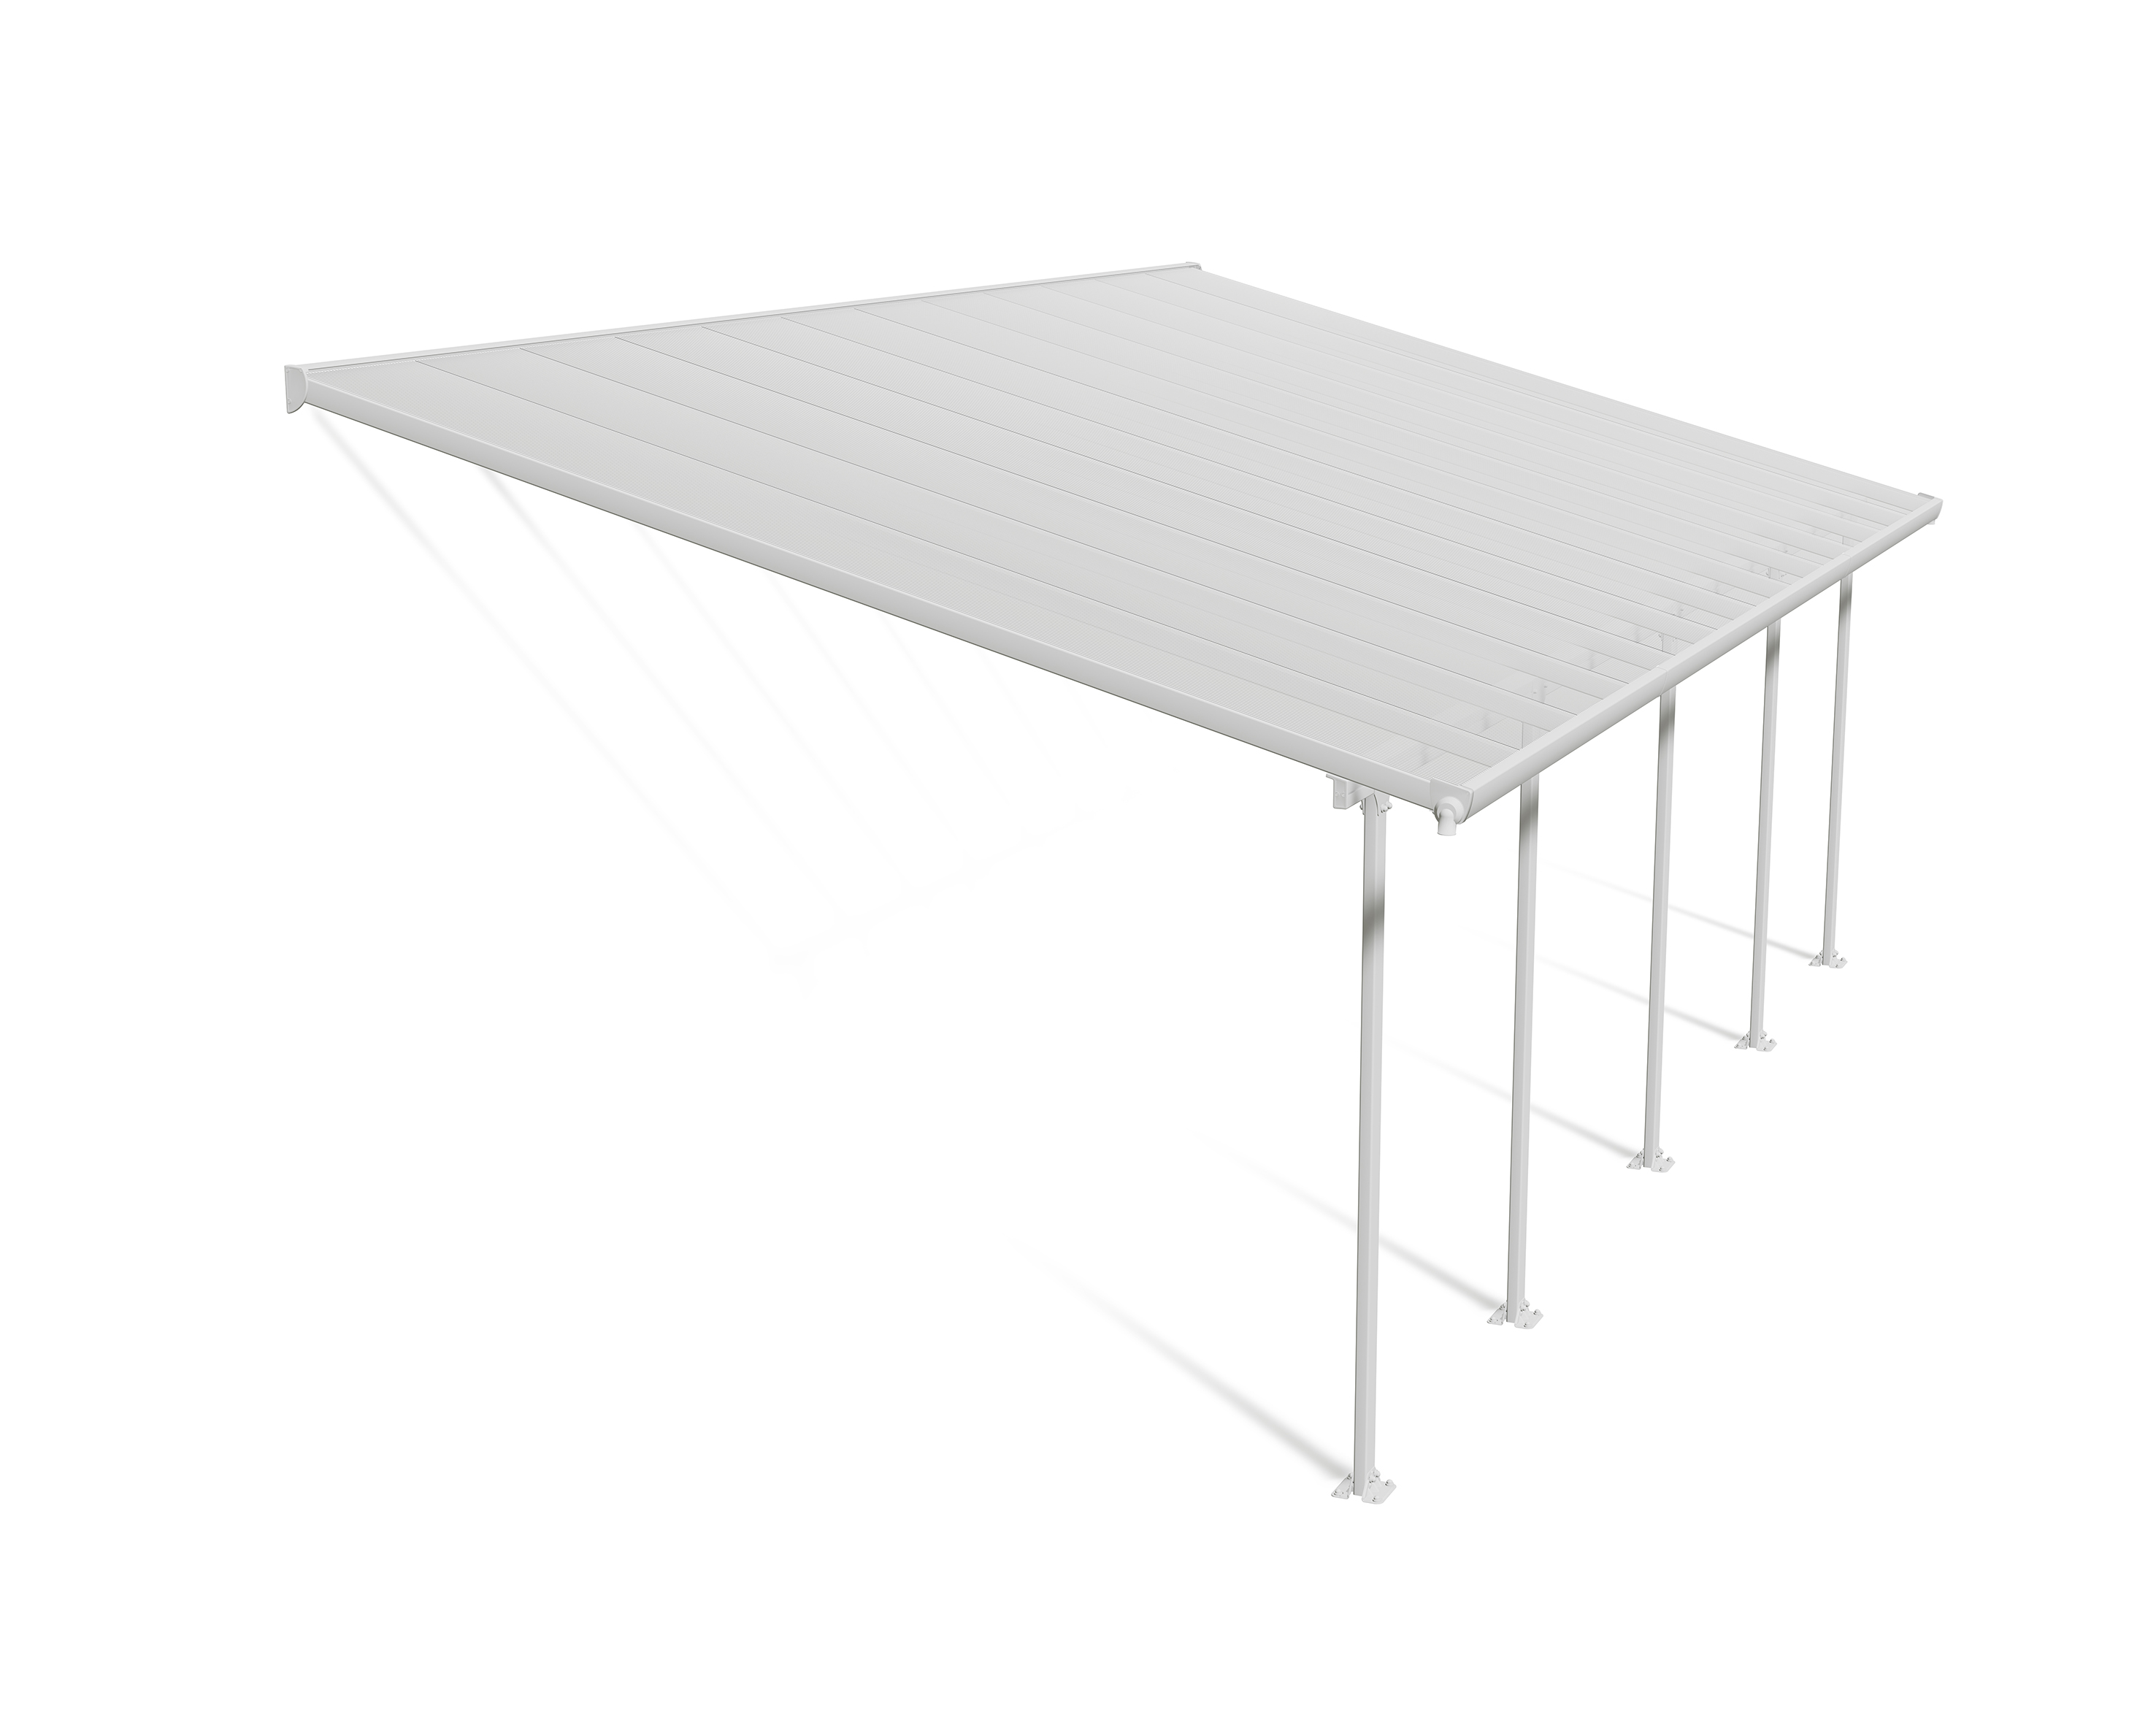 Palram - Canopia Feria 13' x 26' Polycarbonate/Galvanized Steel Patio Cover - White/Clear - image 1 of 9